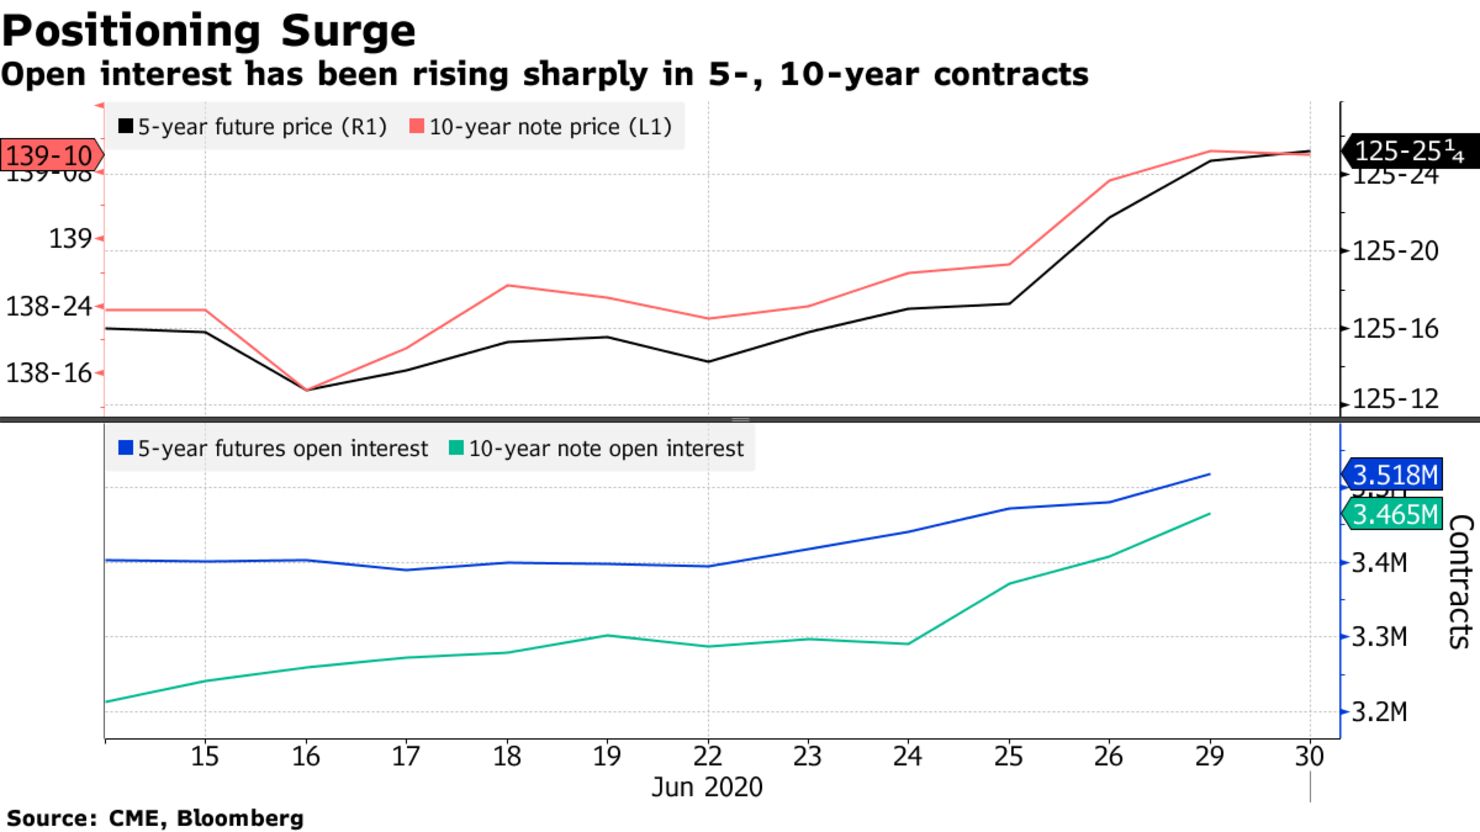 Open interest has been rising sharply in 5-, 10-year contracts